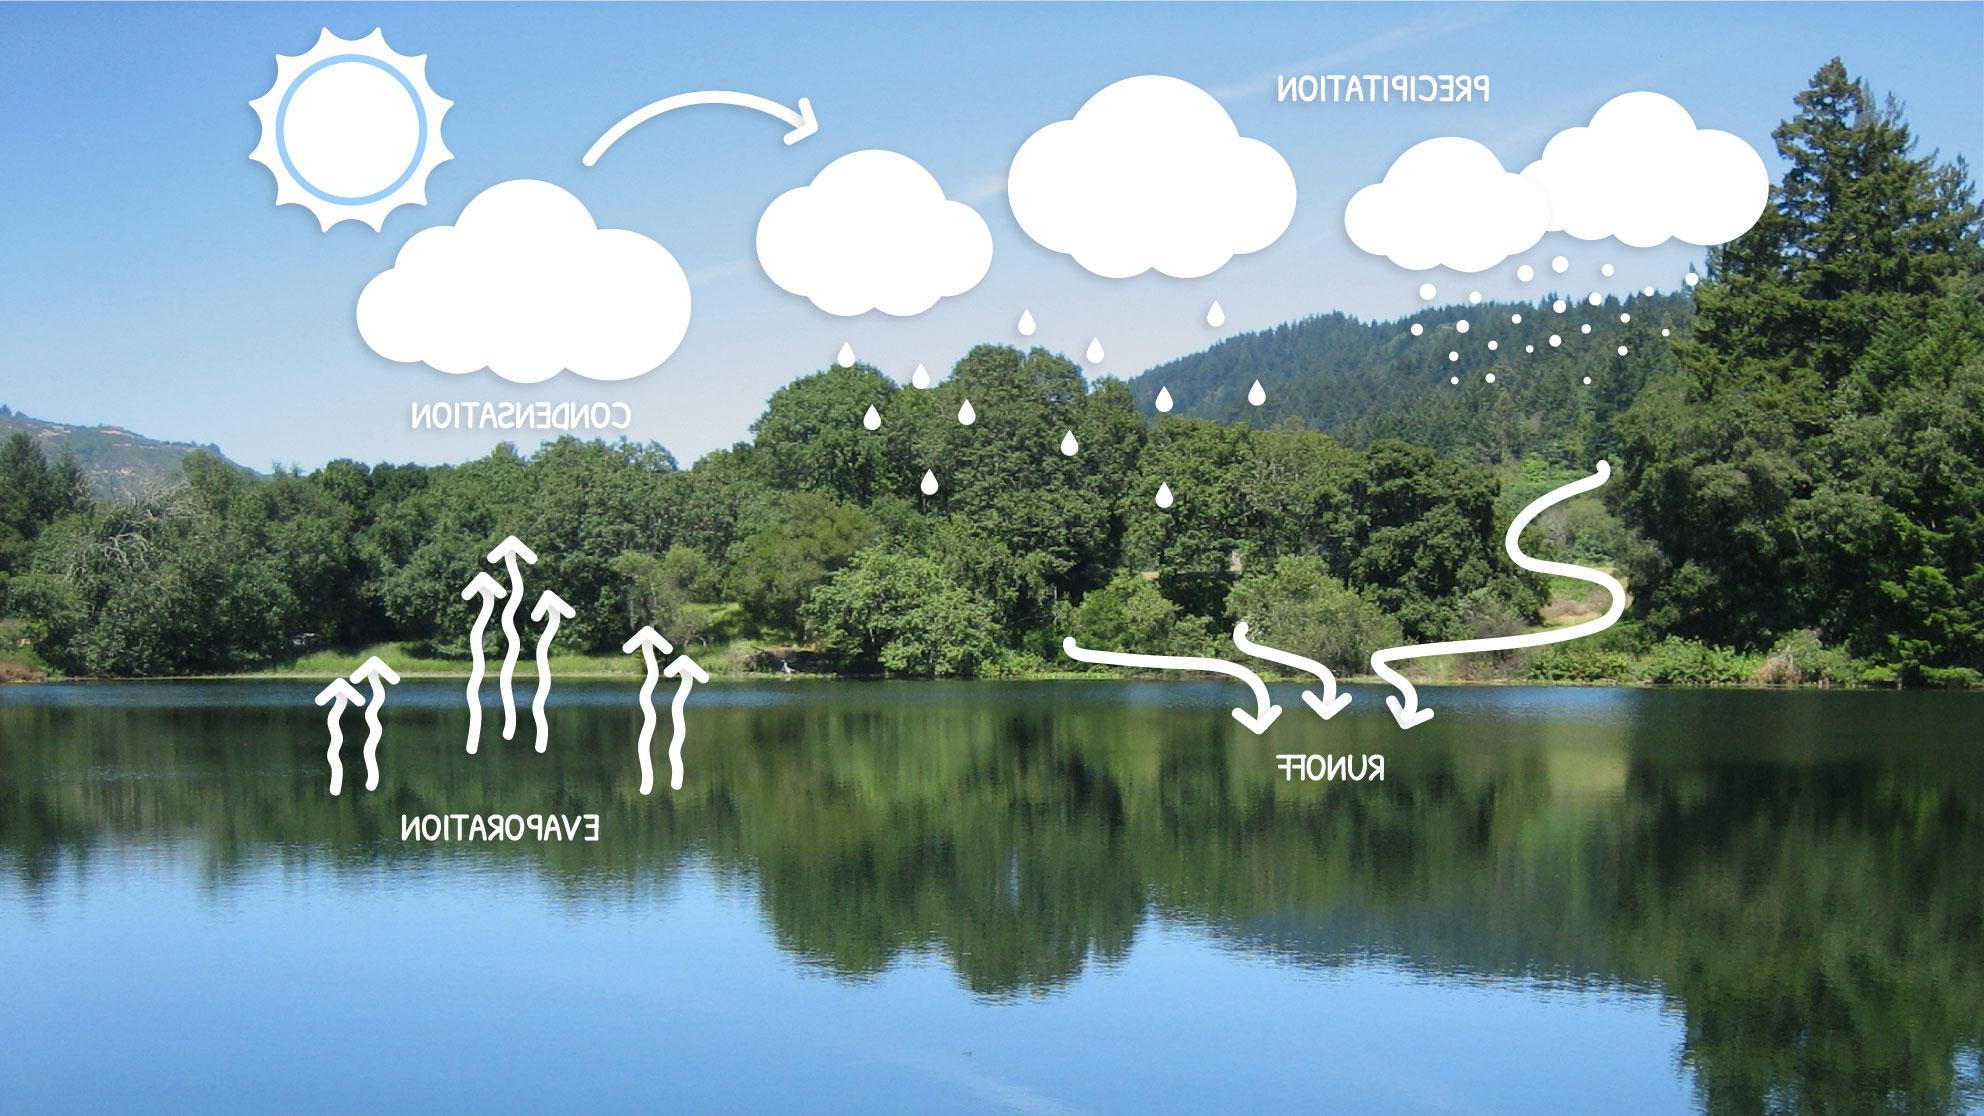 Illustration of the Water Cycle